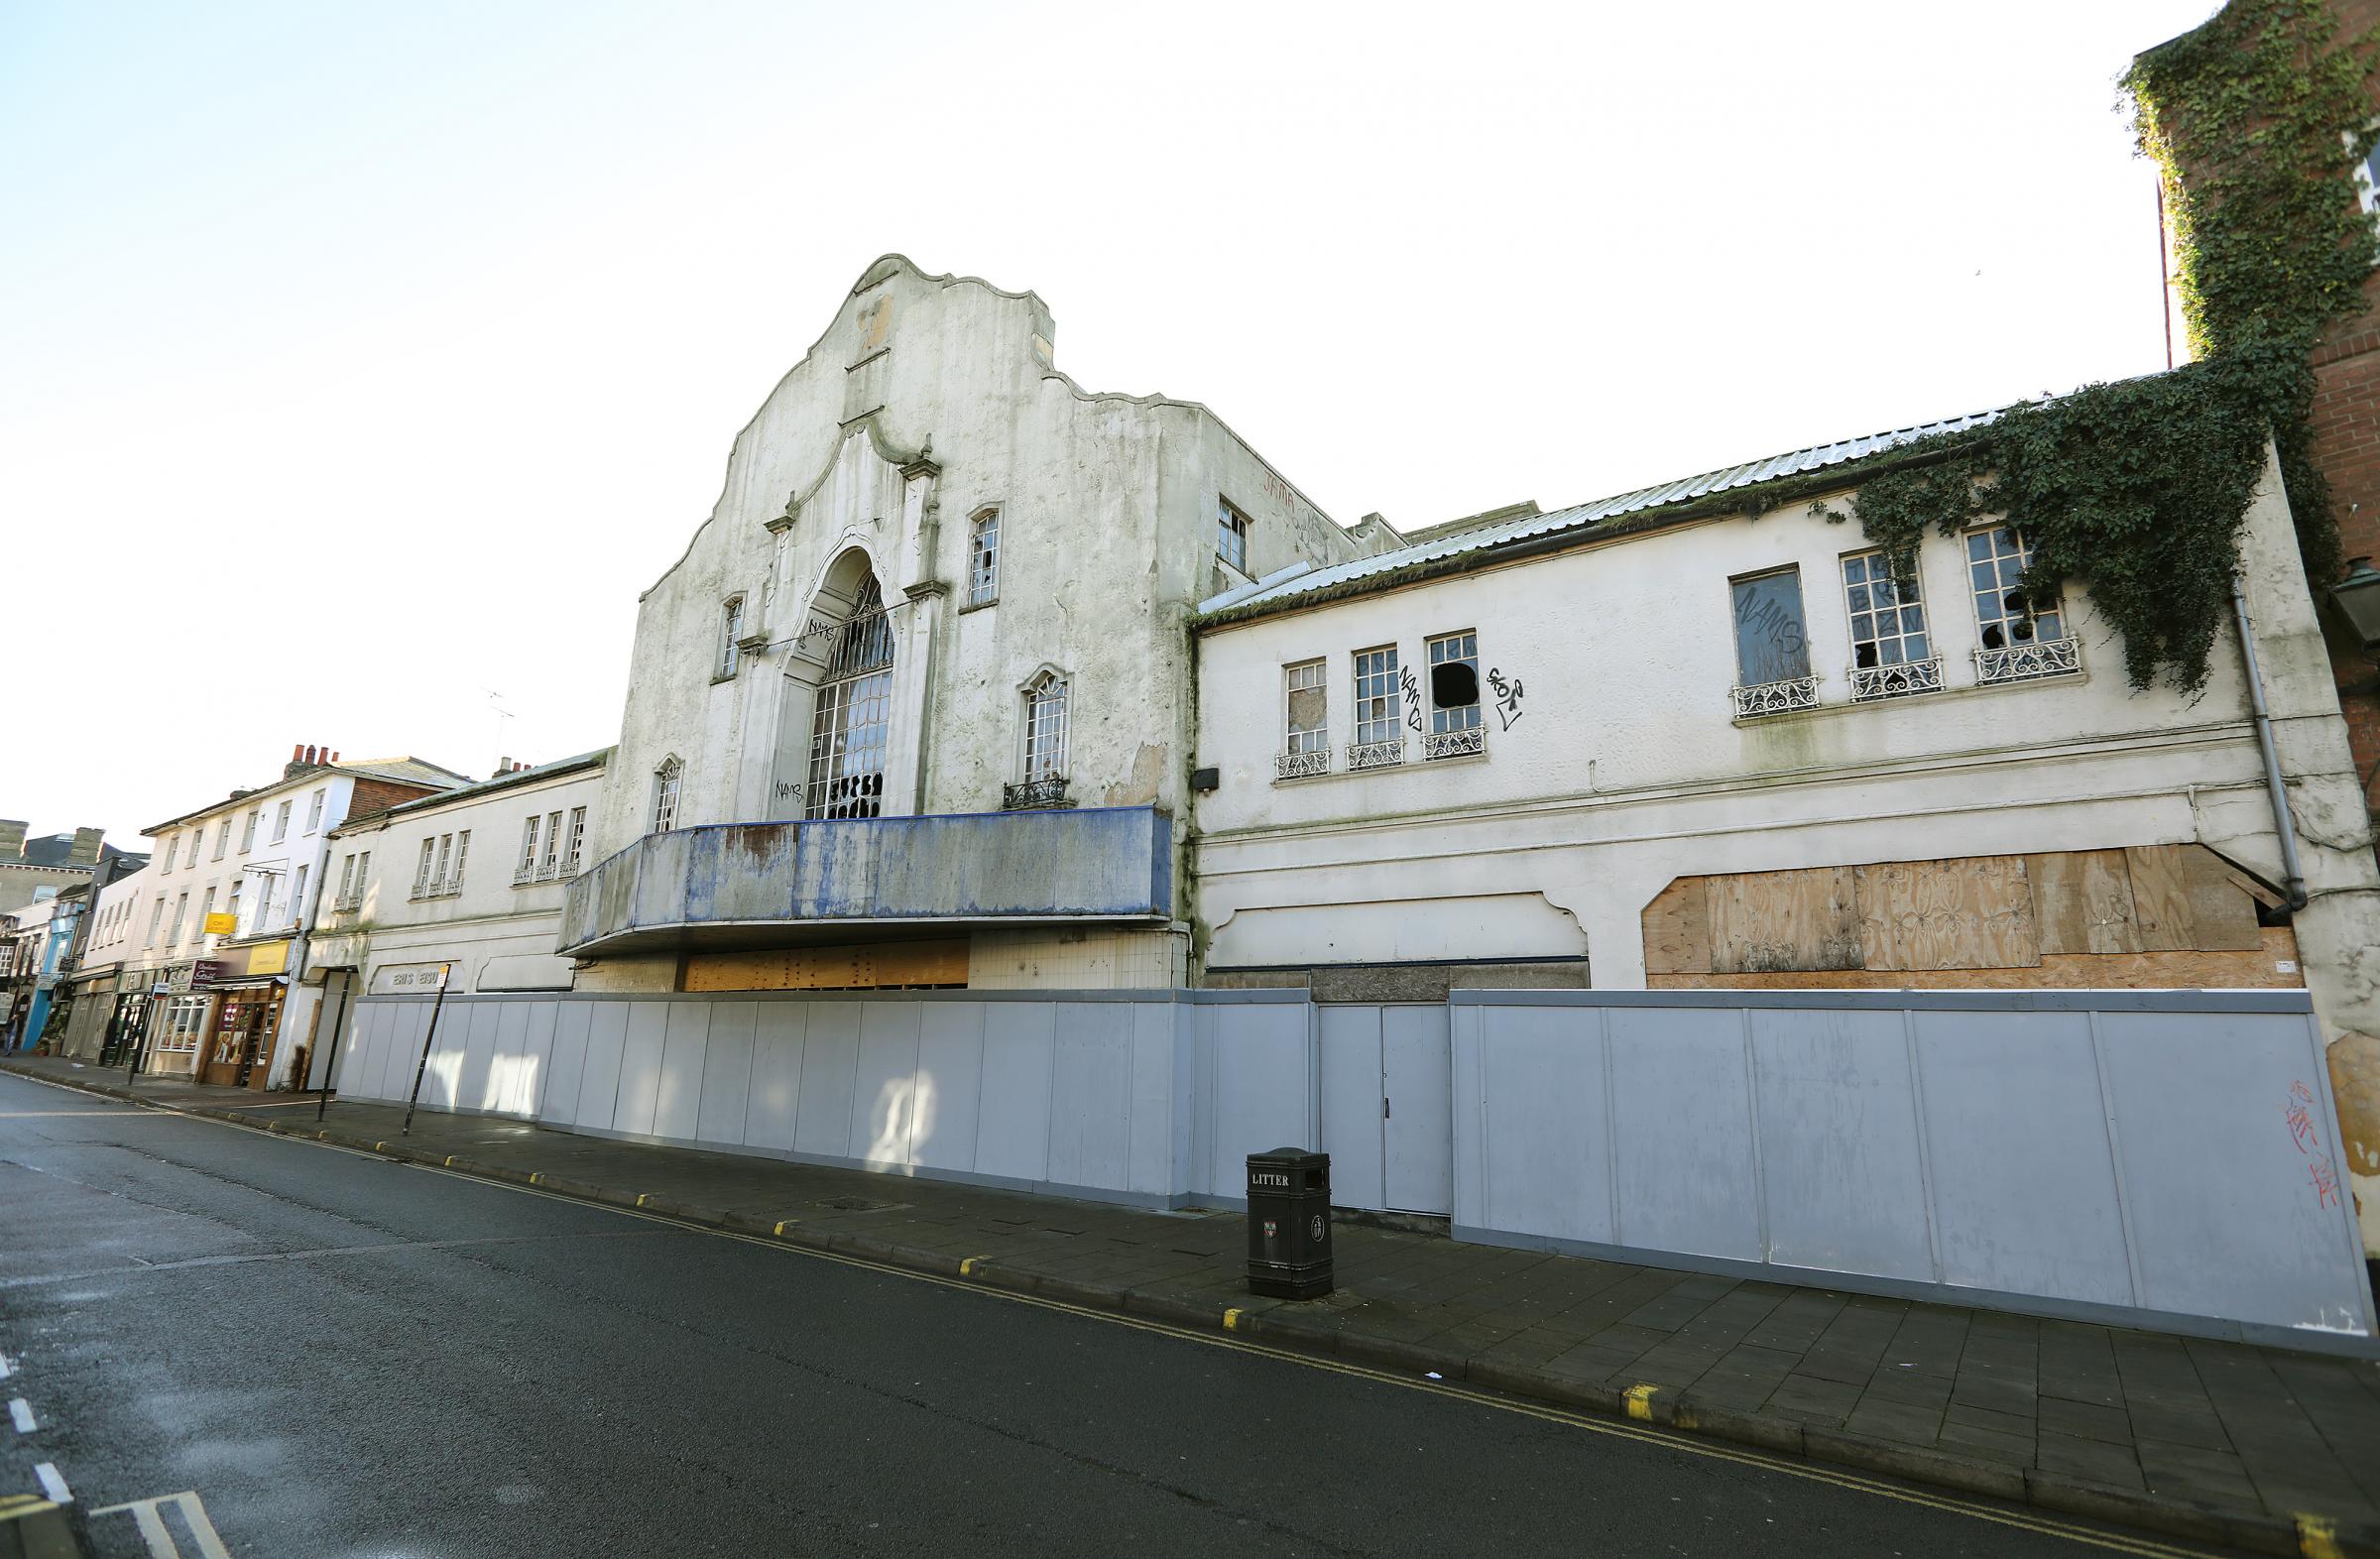 Derelict - the old Odeon has been empty since the cinema relocated back in 2002